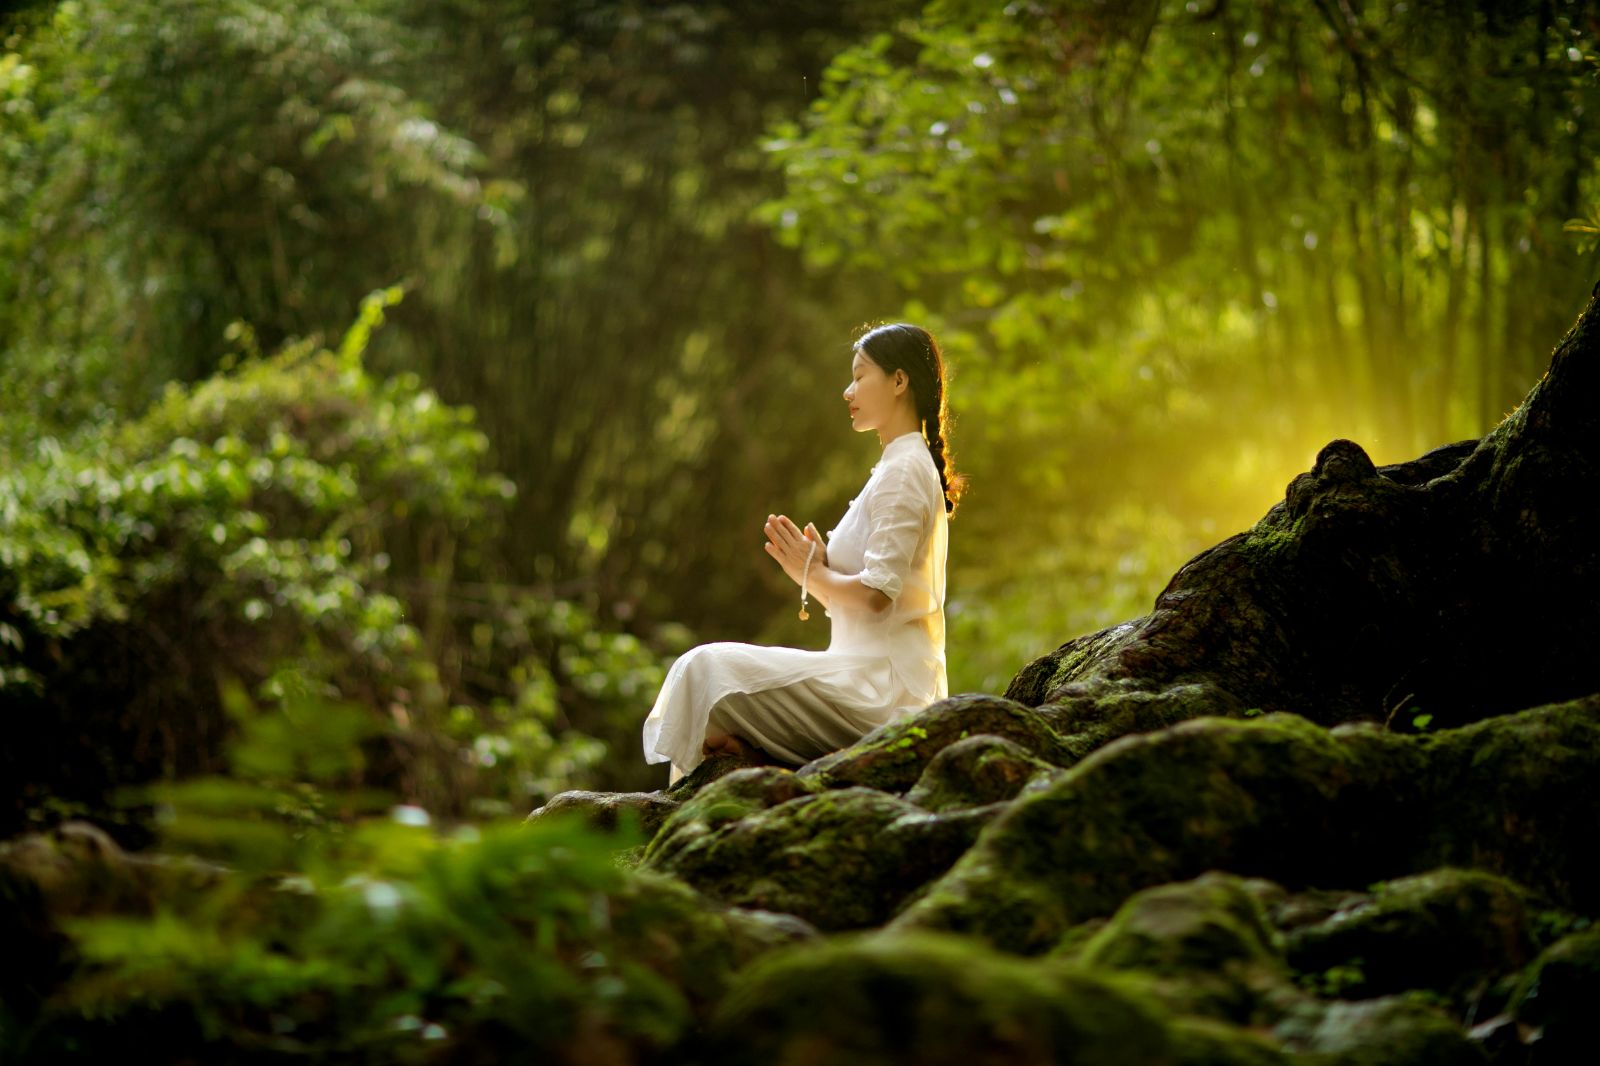 A woman partaking in a serene forest meditation session